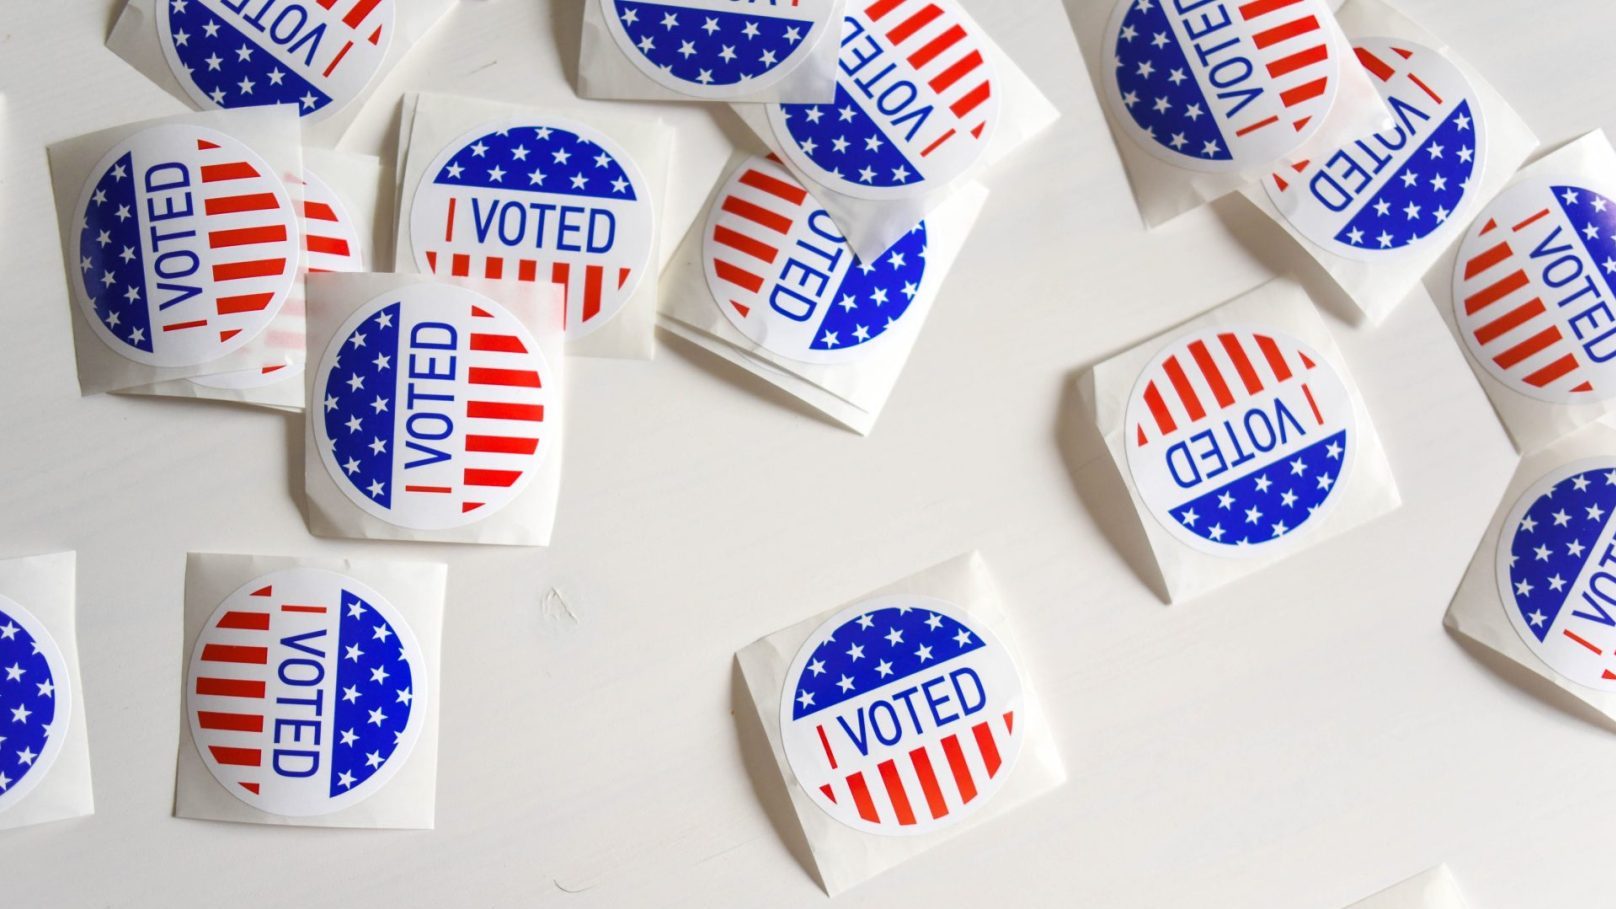 Round stickers reading “I VOTED” with starts and stripes reminiscent of the ones on the American flag scattered across a white background.